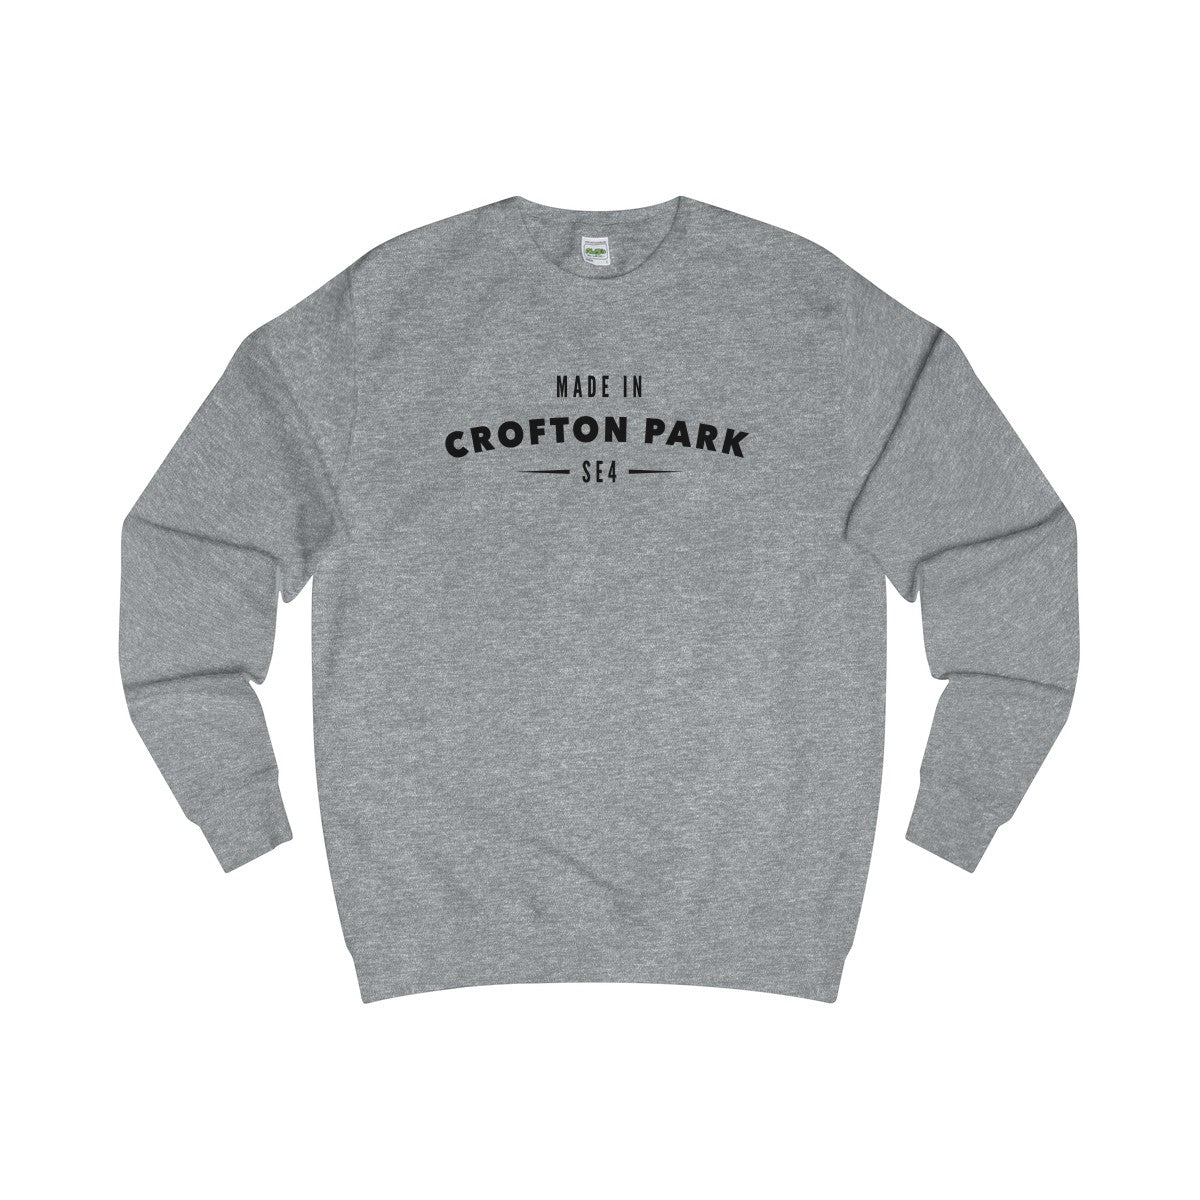 Made In Crofton Park Sweater